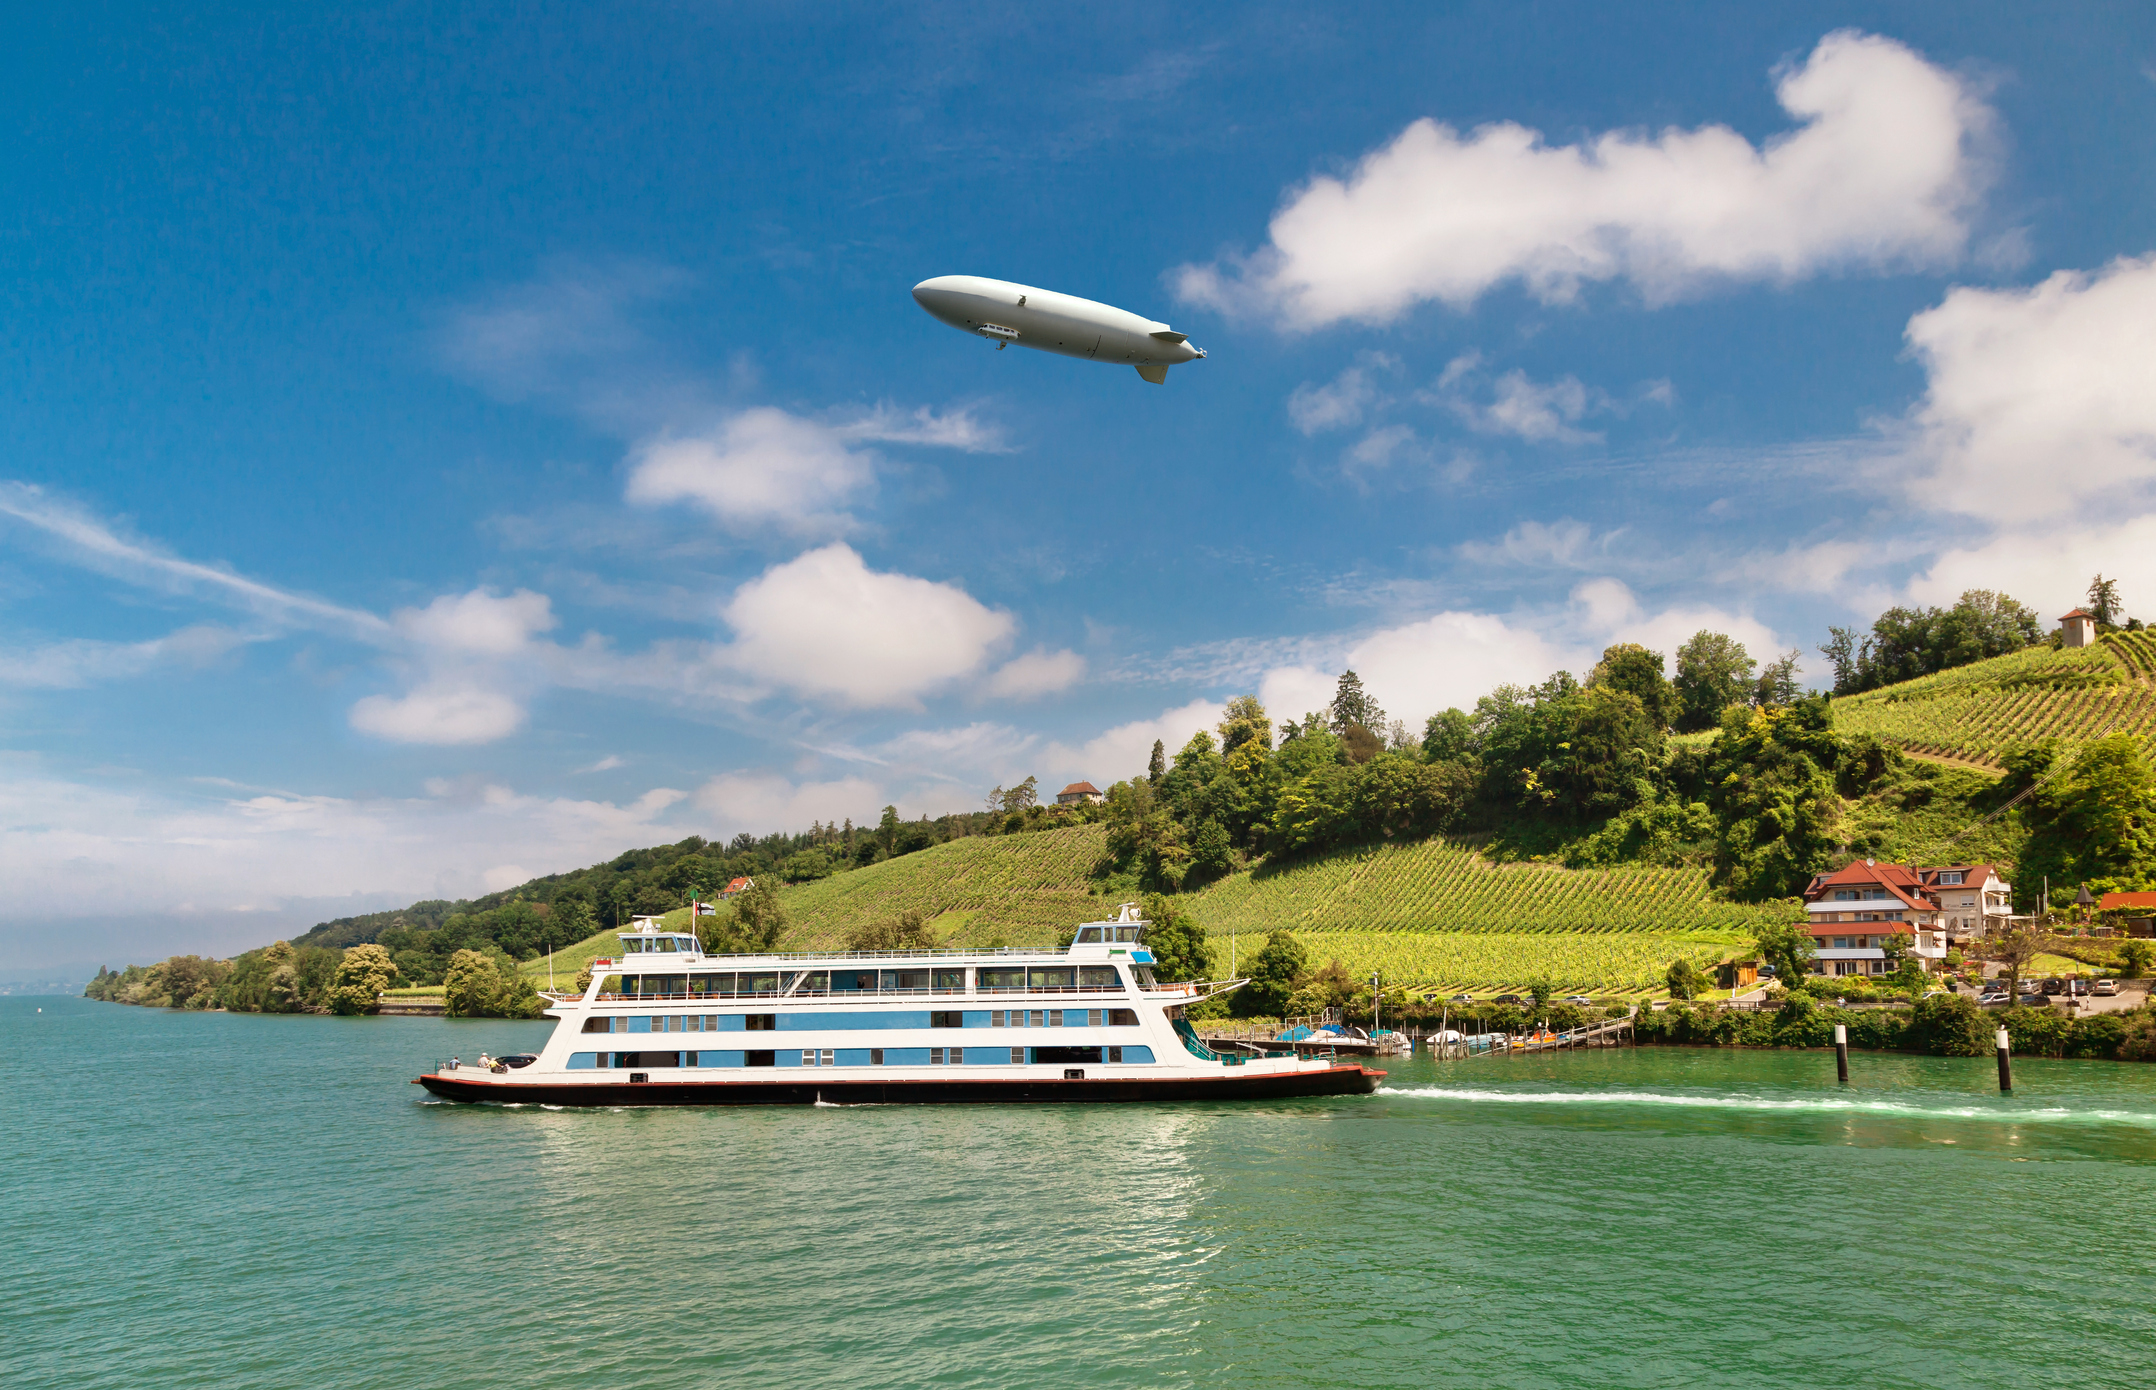 A Zeppelin hovers over a river landscape with vineyards and a ferry.